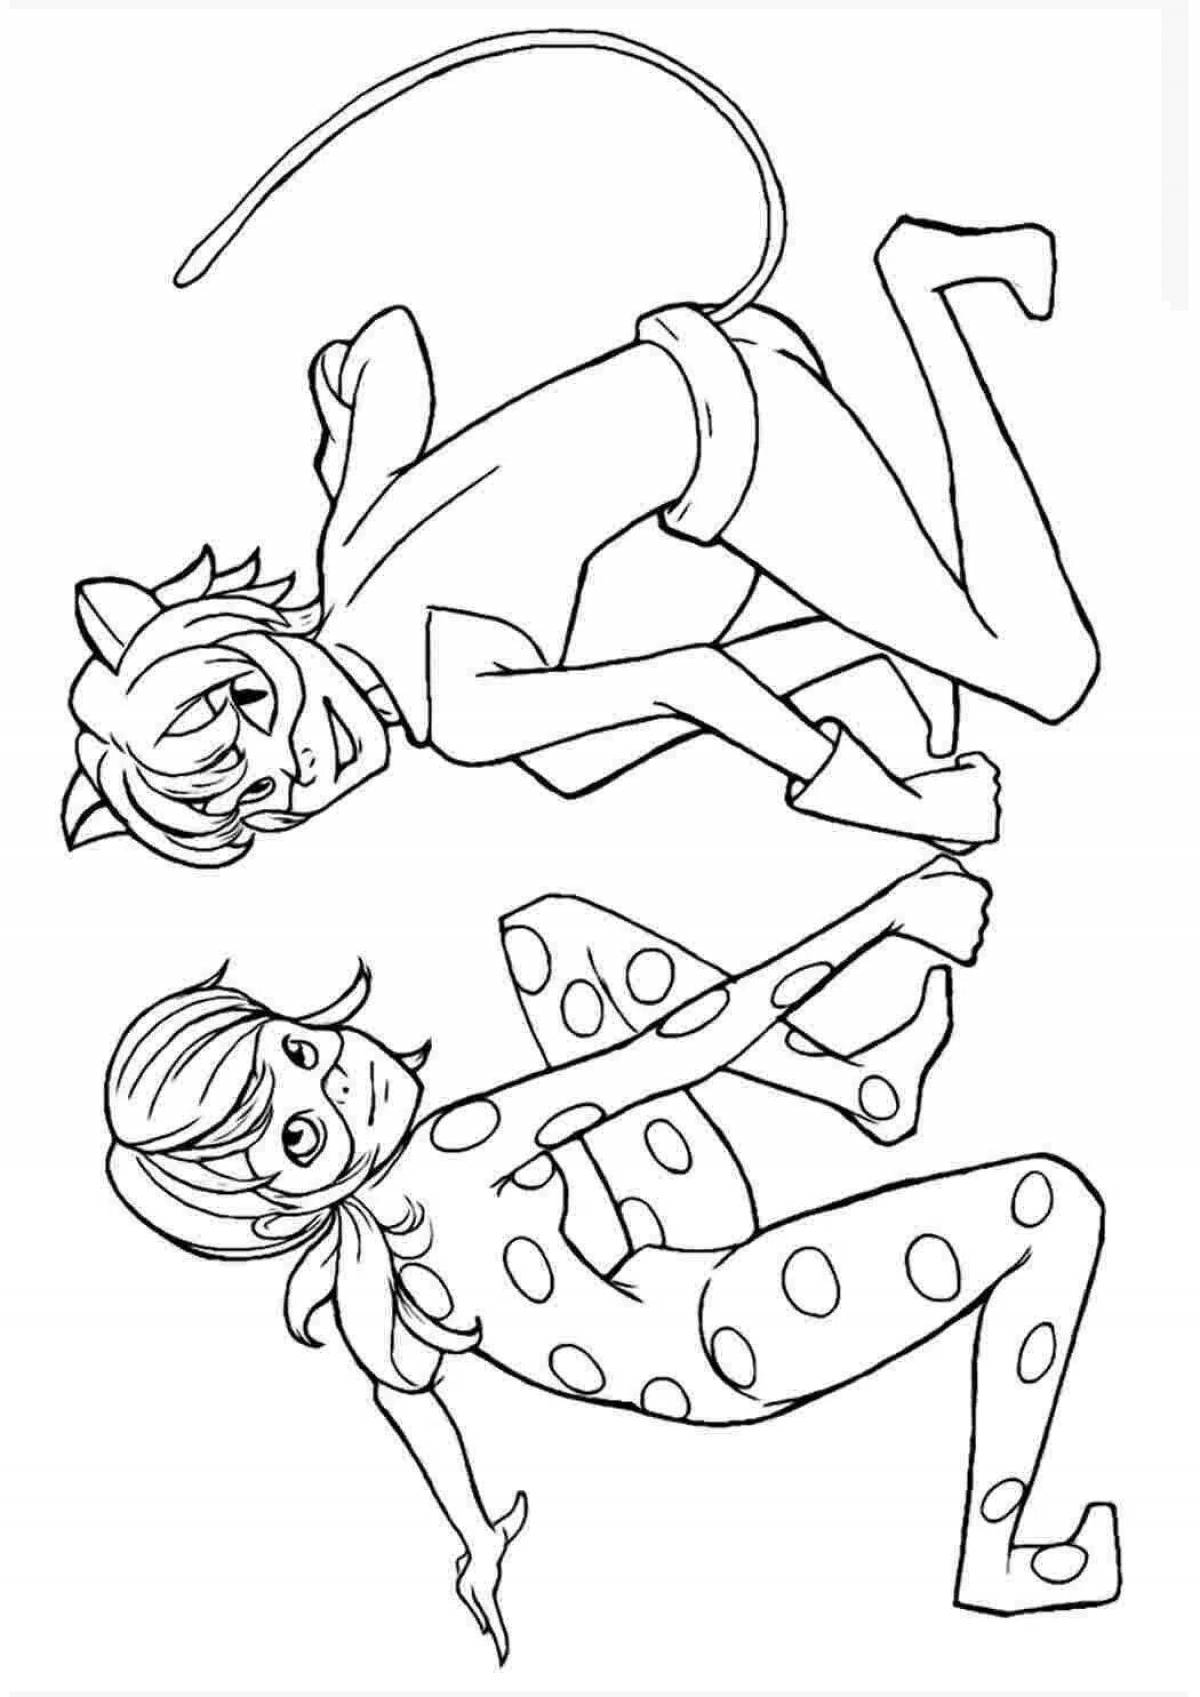 Live cat and ladybug coloring book